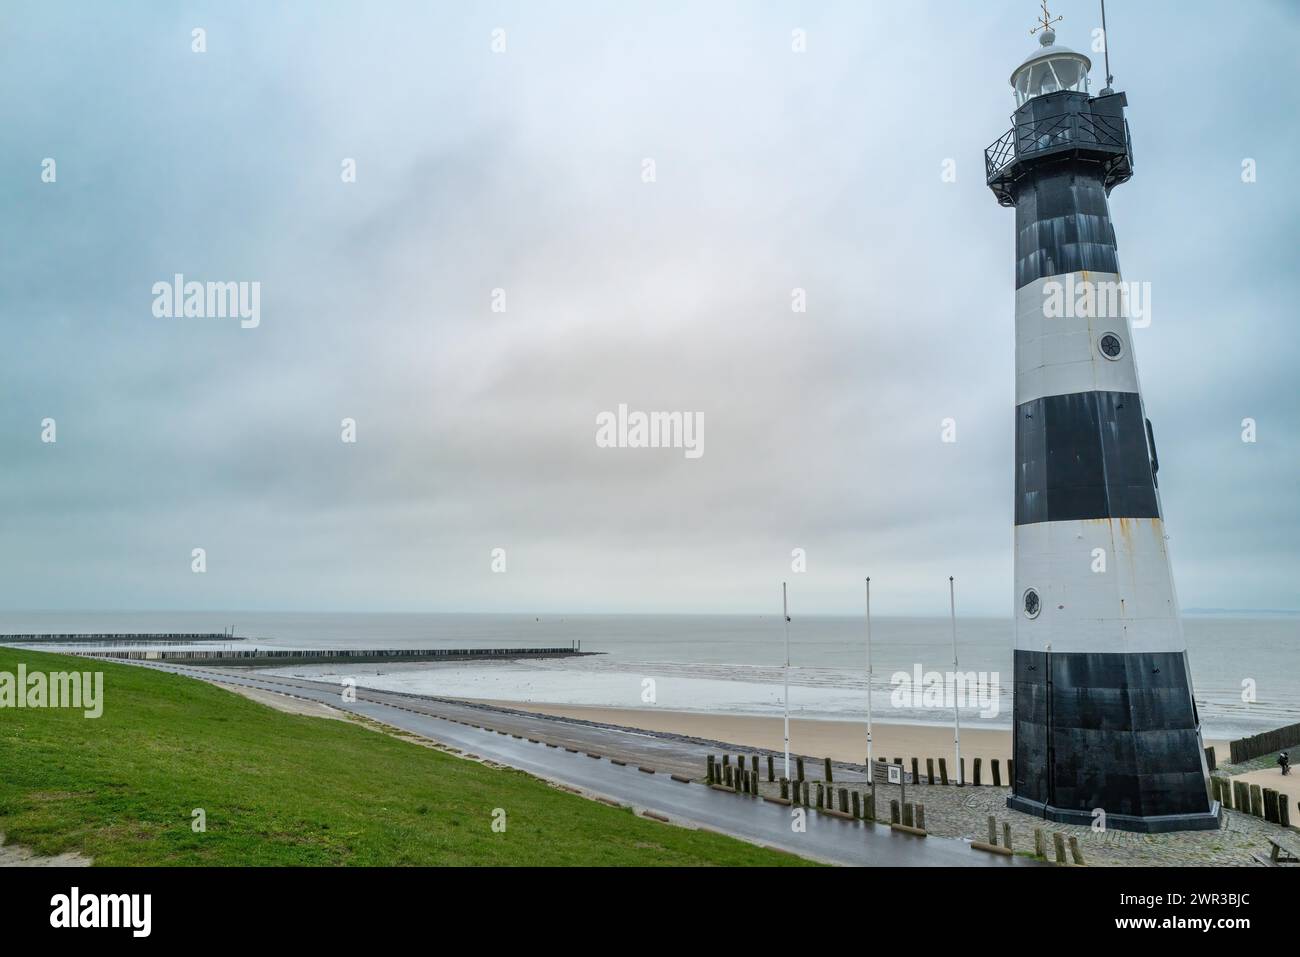 A black and white lighthouse with beach piles and a green area on a cloudy day, Breskens, Zeeland, Netherlands Stock Photo